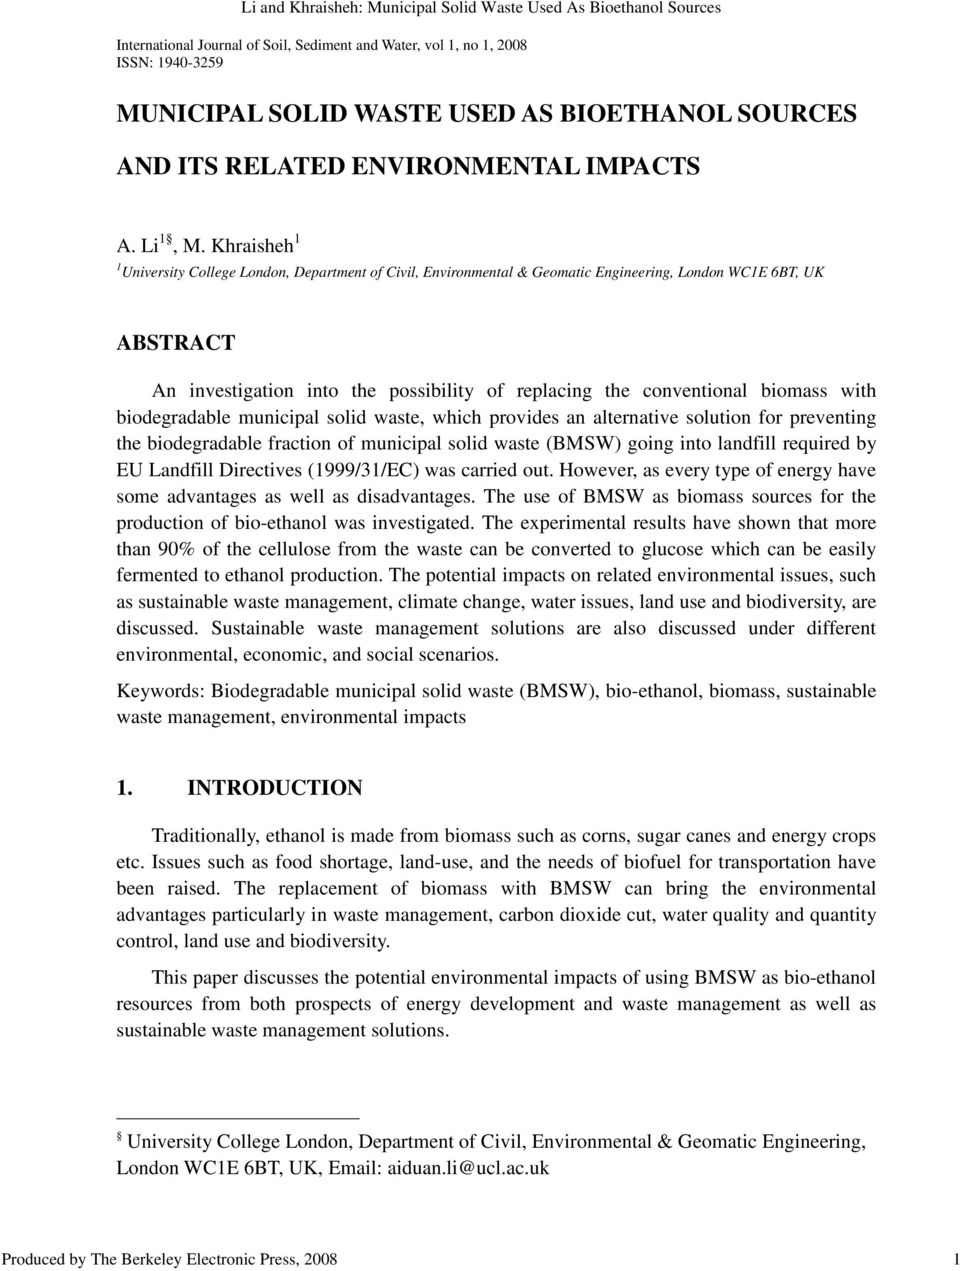 Khraisheh 1 1 University College London, Department of Civil, Environmental & Geomatic Engineering, London WC1E 6BT, UK ABSTRACT An investigation into the possibility of replacing the conventional